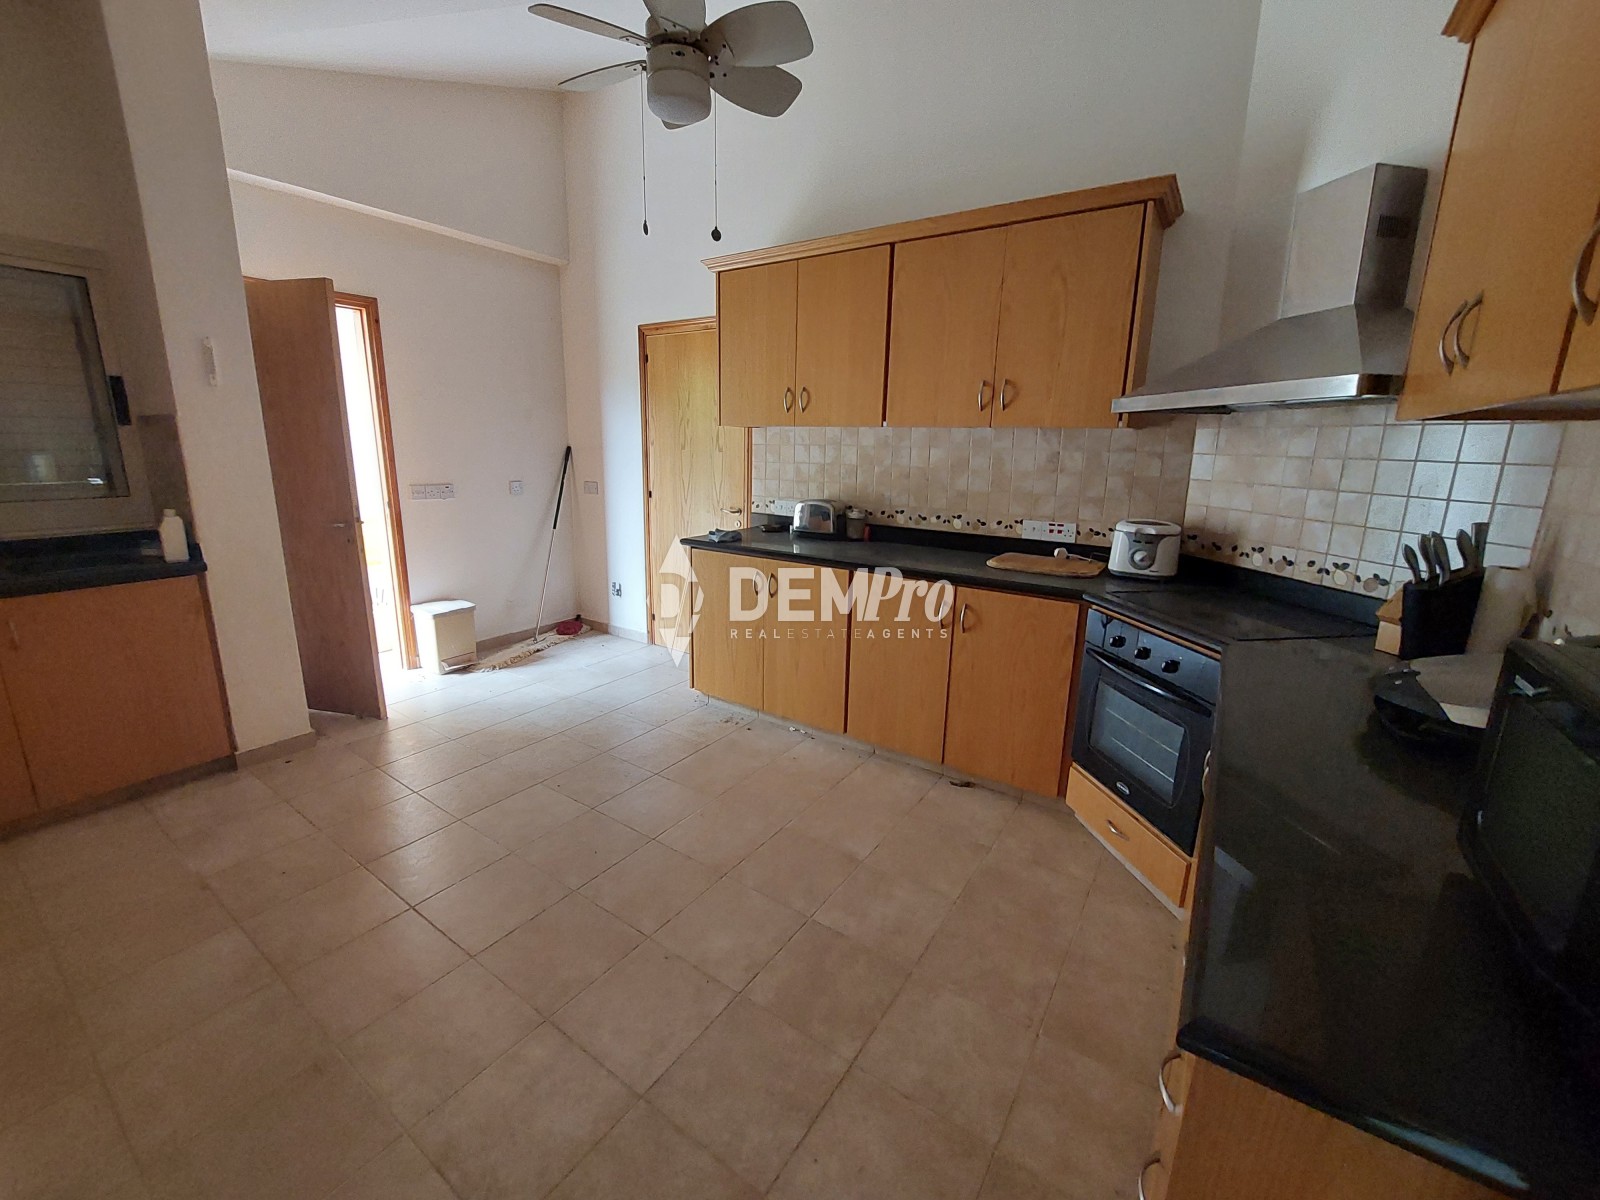 4 Bedroom Villa for Sale in Koili, Paphos District